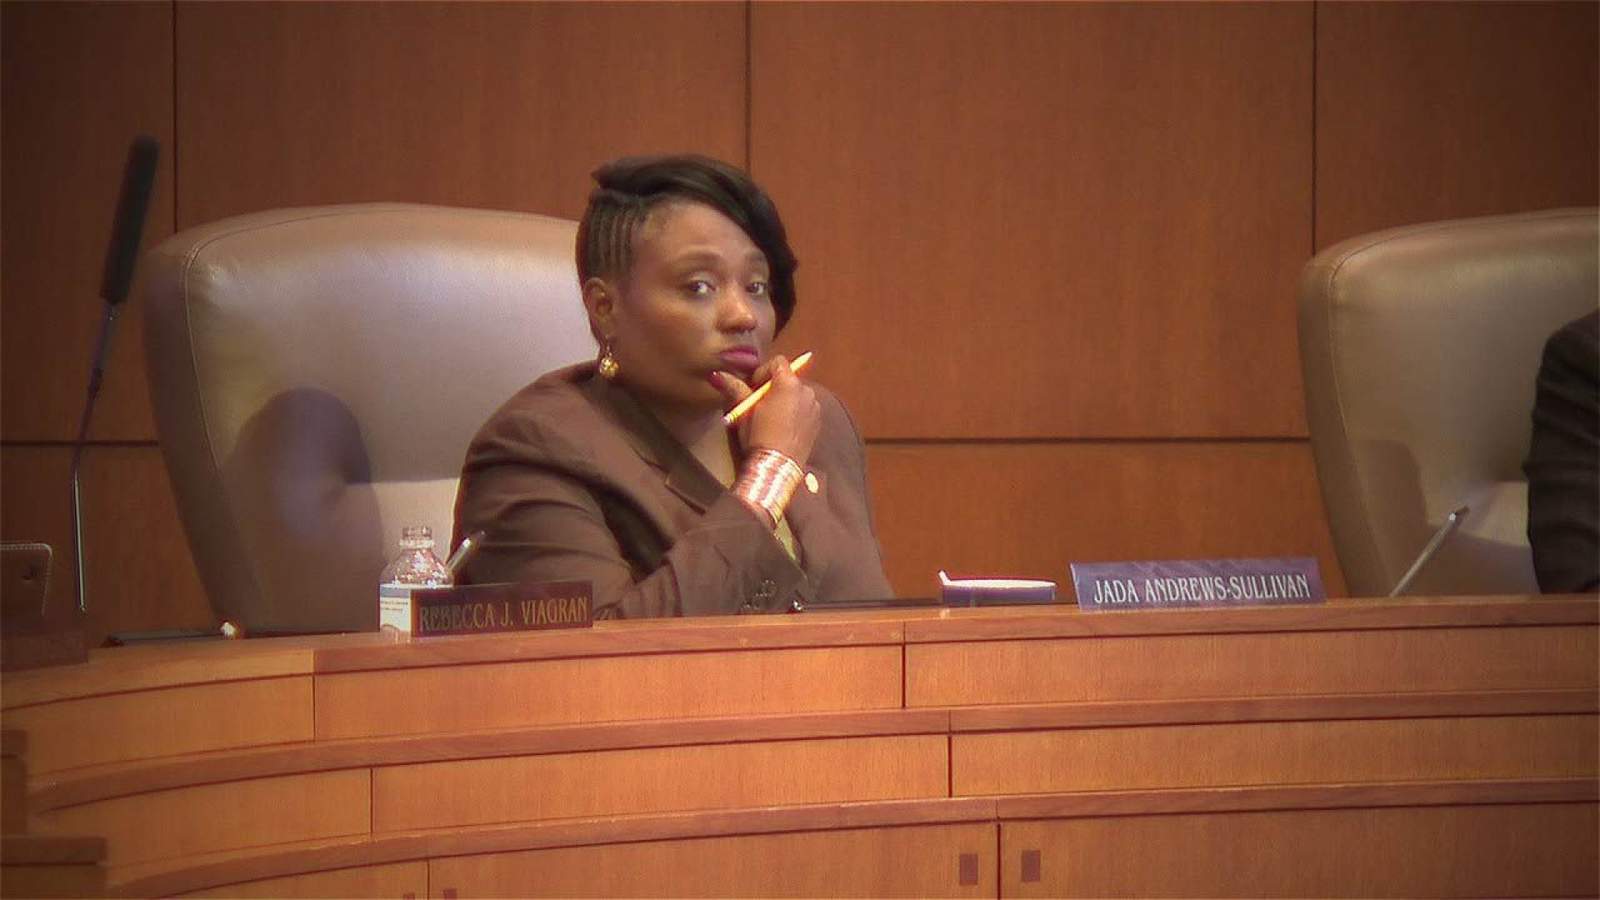 District Two Councilwoman Jada Andrews-Sullivan files for re-election